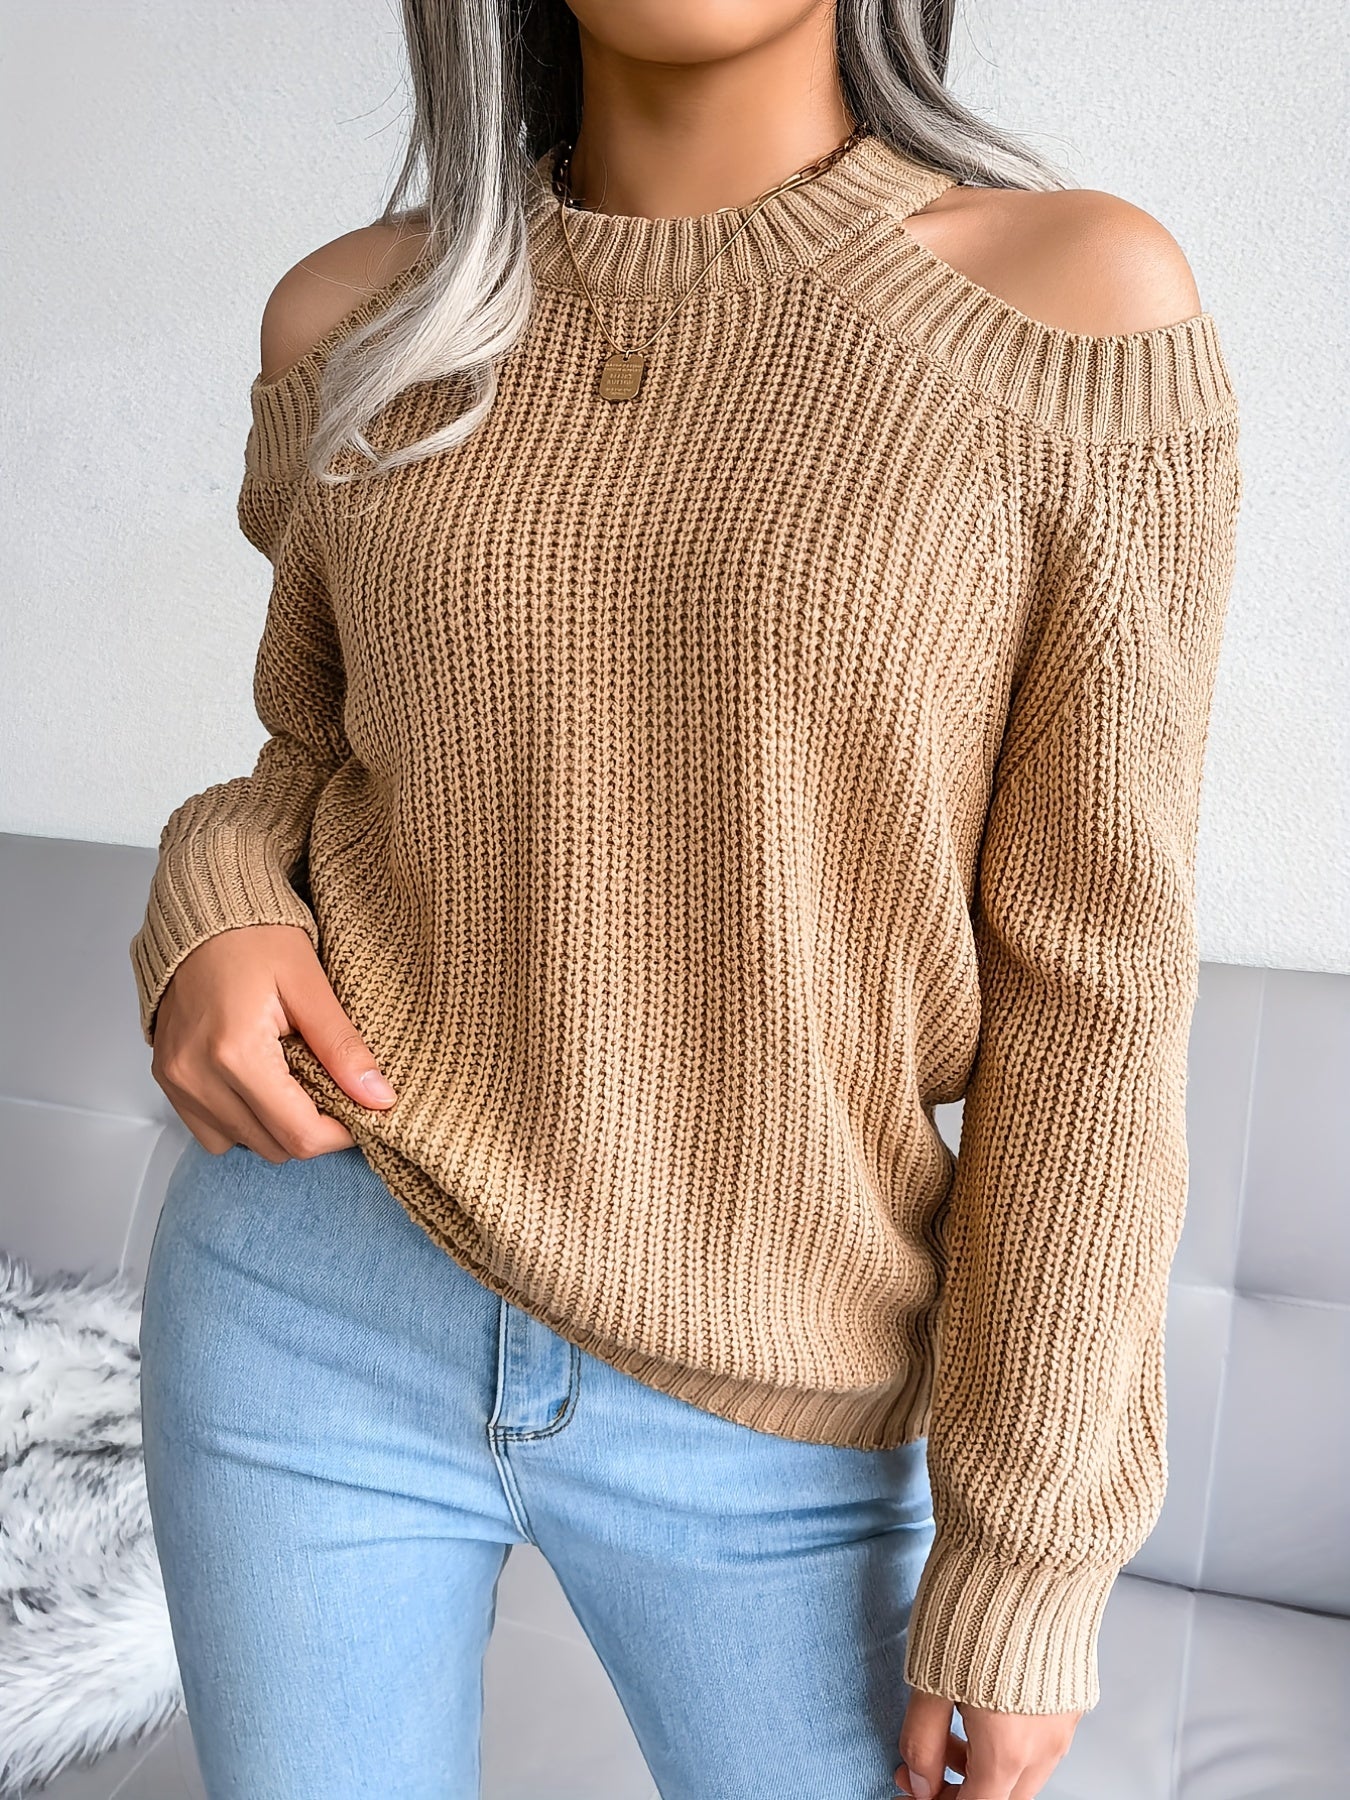 Antmvs Solid Color Crew Neck Cold Shoulder Knitted Tops, Casual Everyday Pullover Sweaters, Women's Clothing